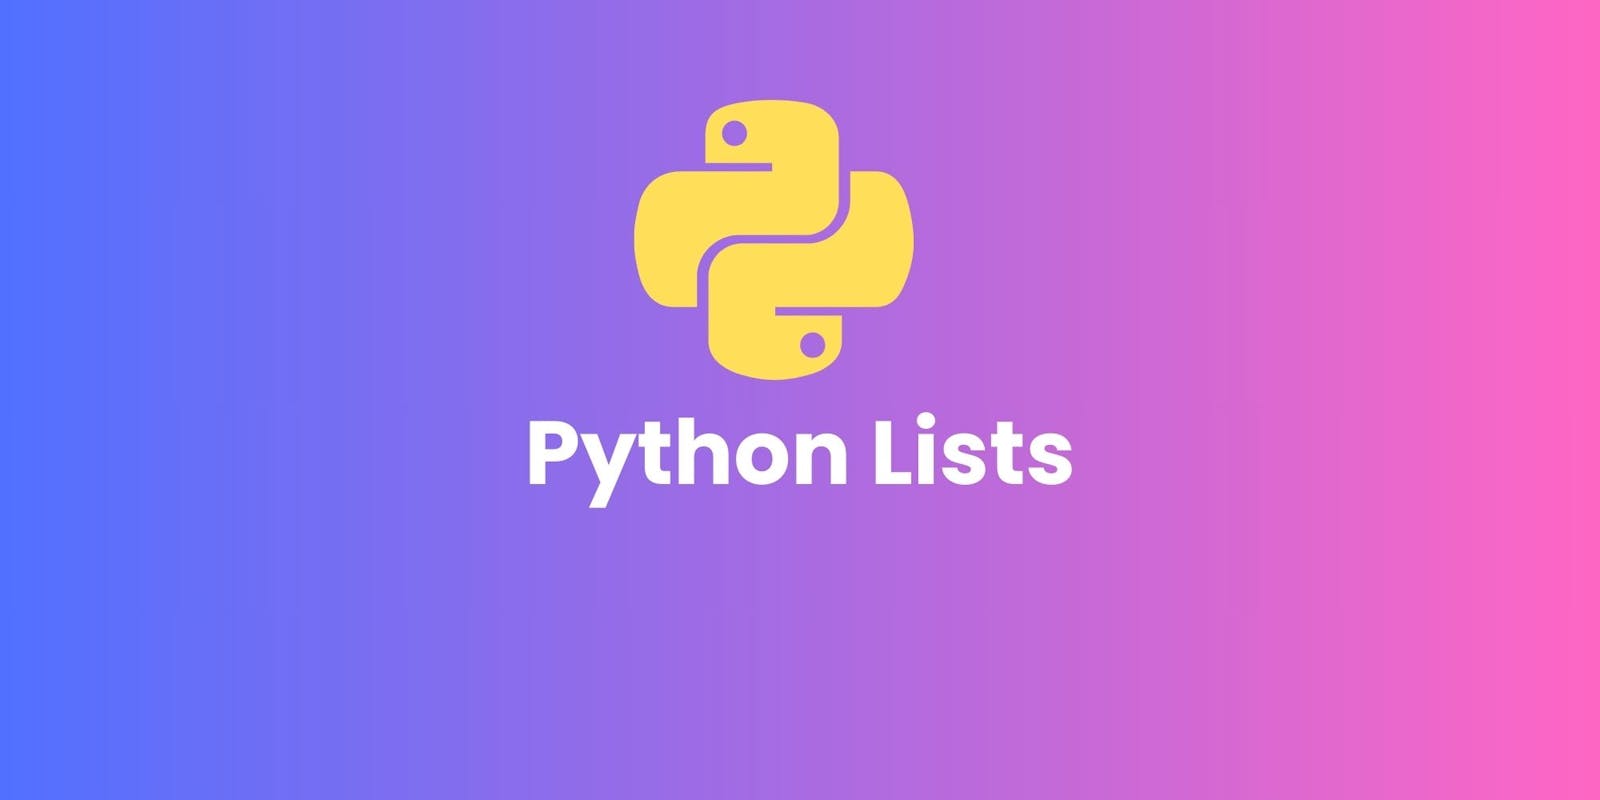 A Gentle Introduction To Python Data Structures (Lists)